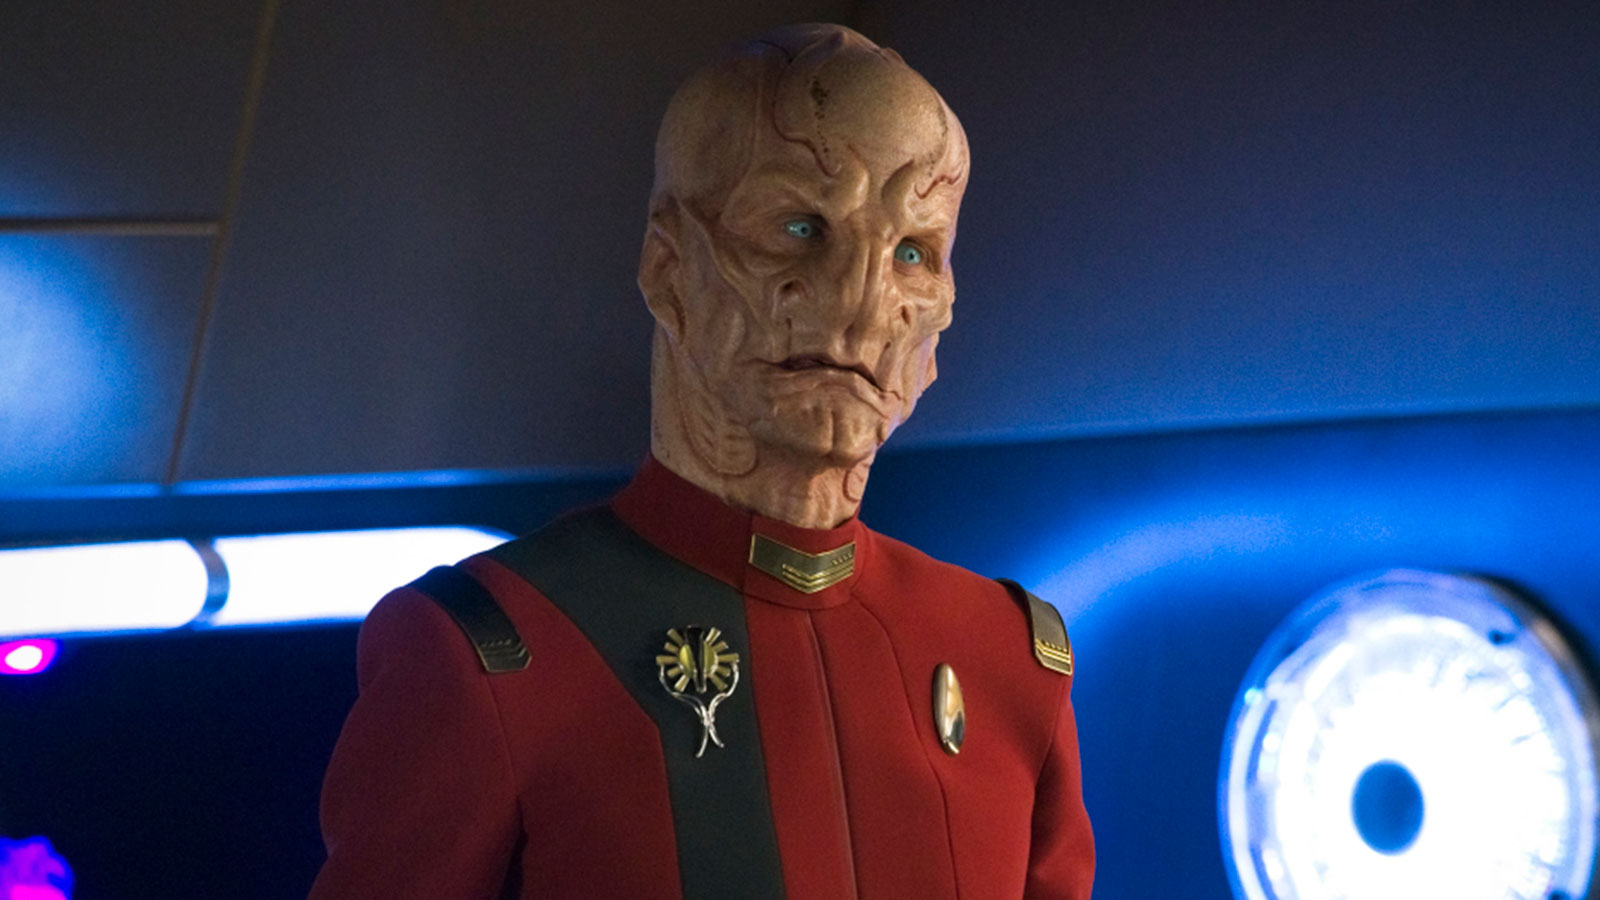 Star Trek: Discovery Episode 405 “The Examples” Preview + New Photos